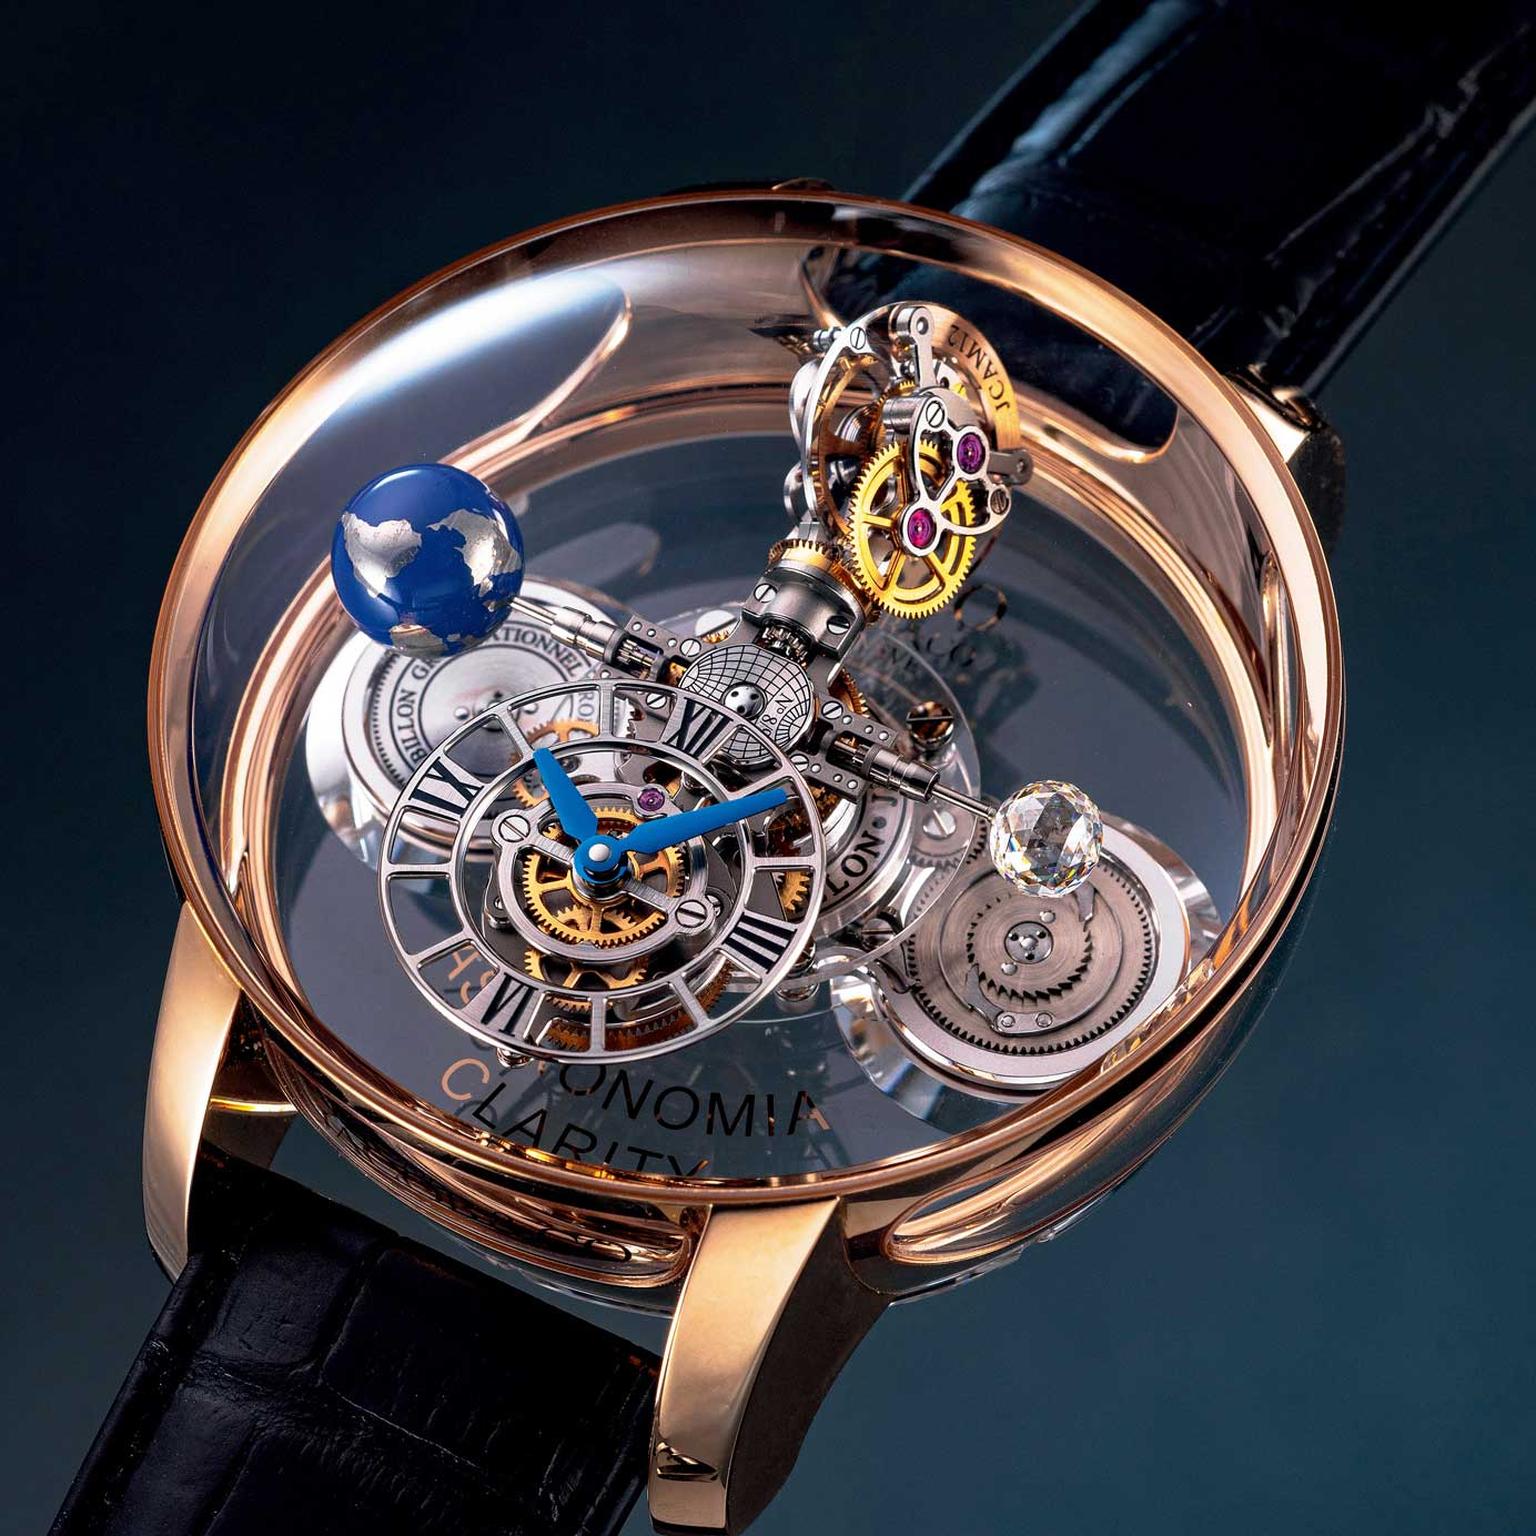 Jacob & Co. Astronomia Clarity Collection Ref AT120 watch